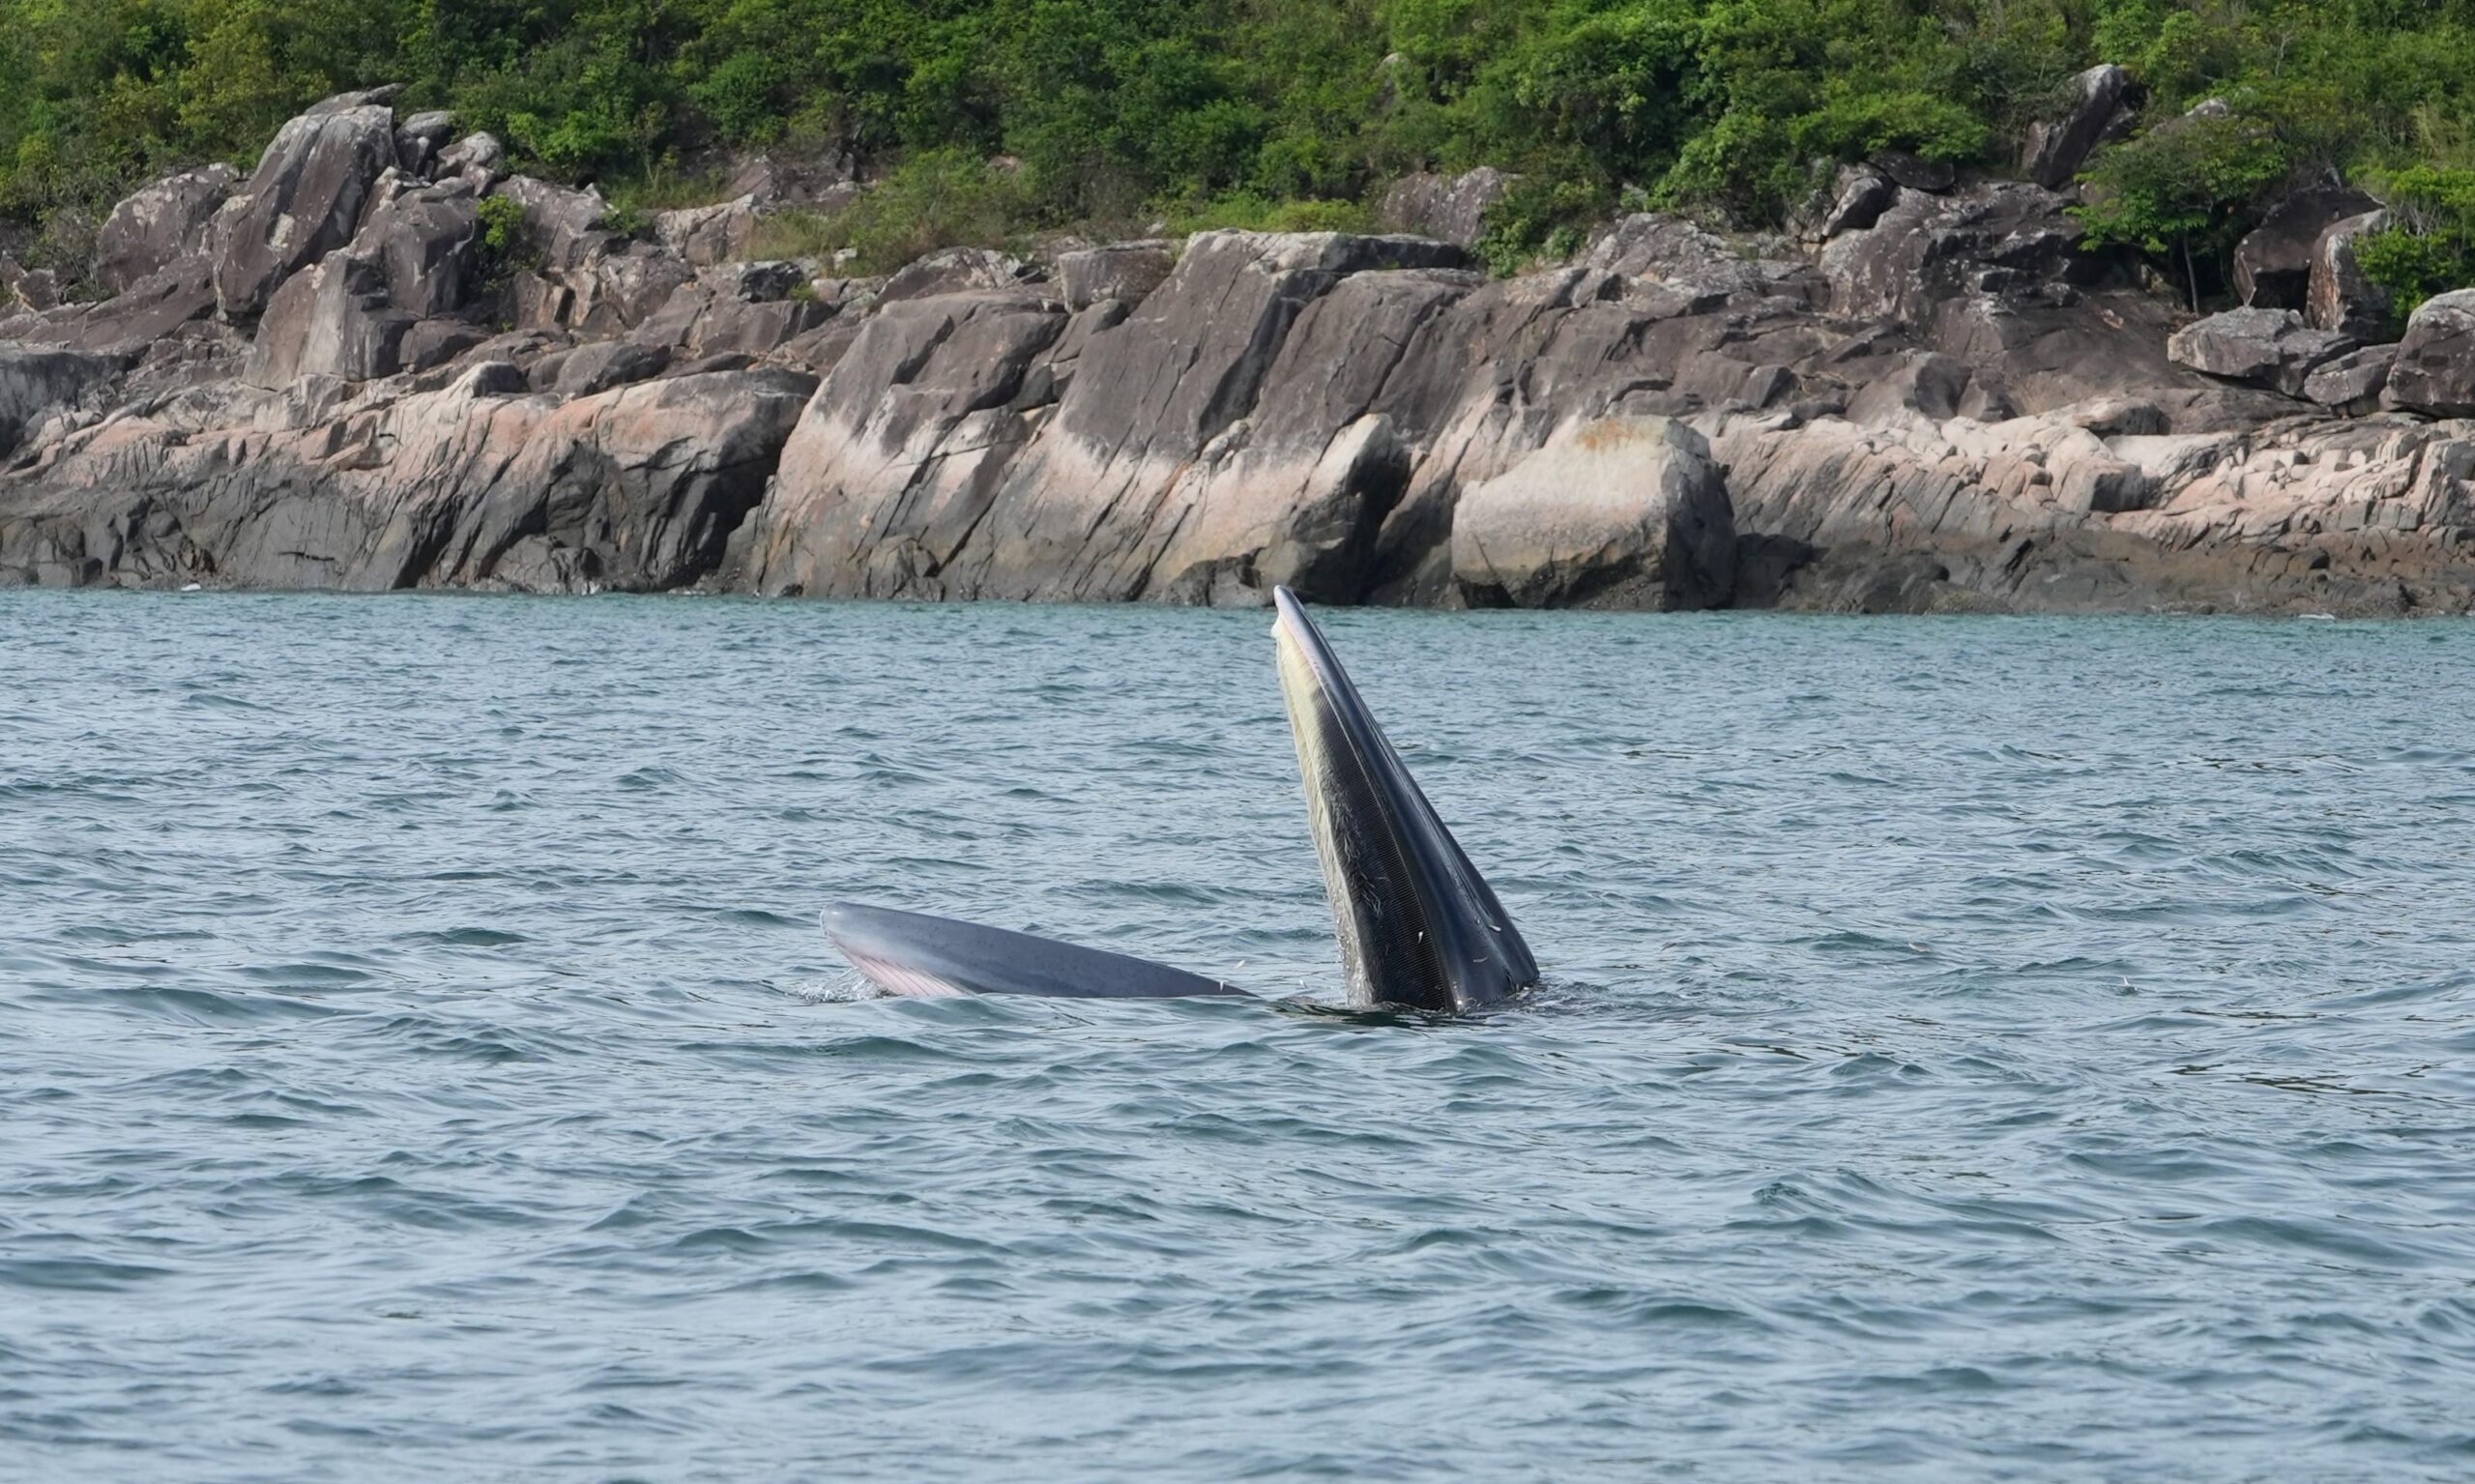 A Bryde's whale in Hong Kong with its jaws protruding out of the water.